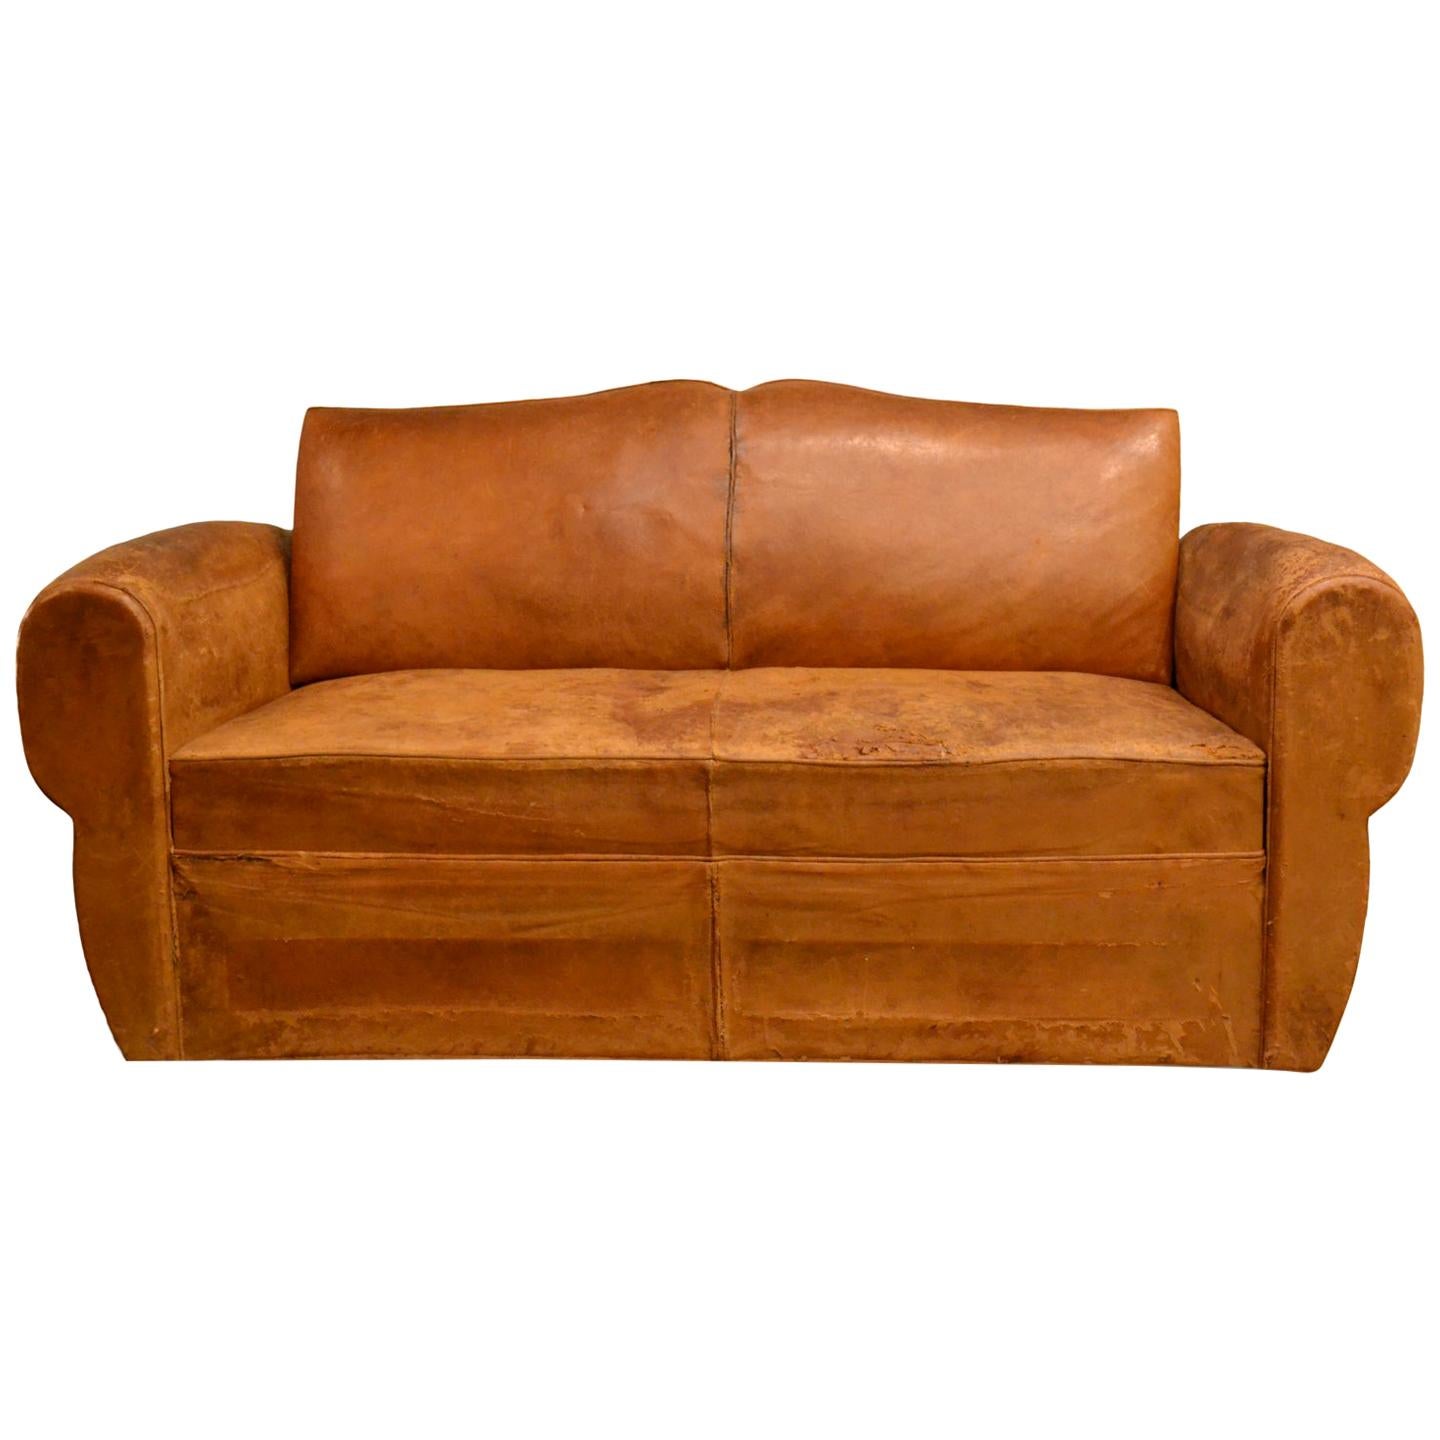 Vintage French 1930s Leather Sofa